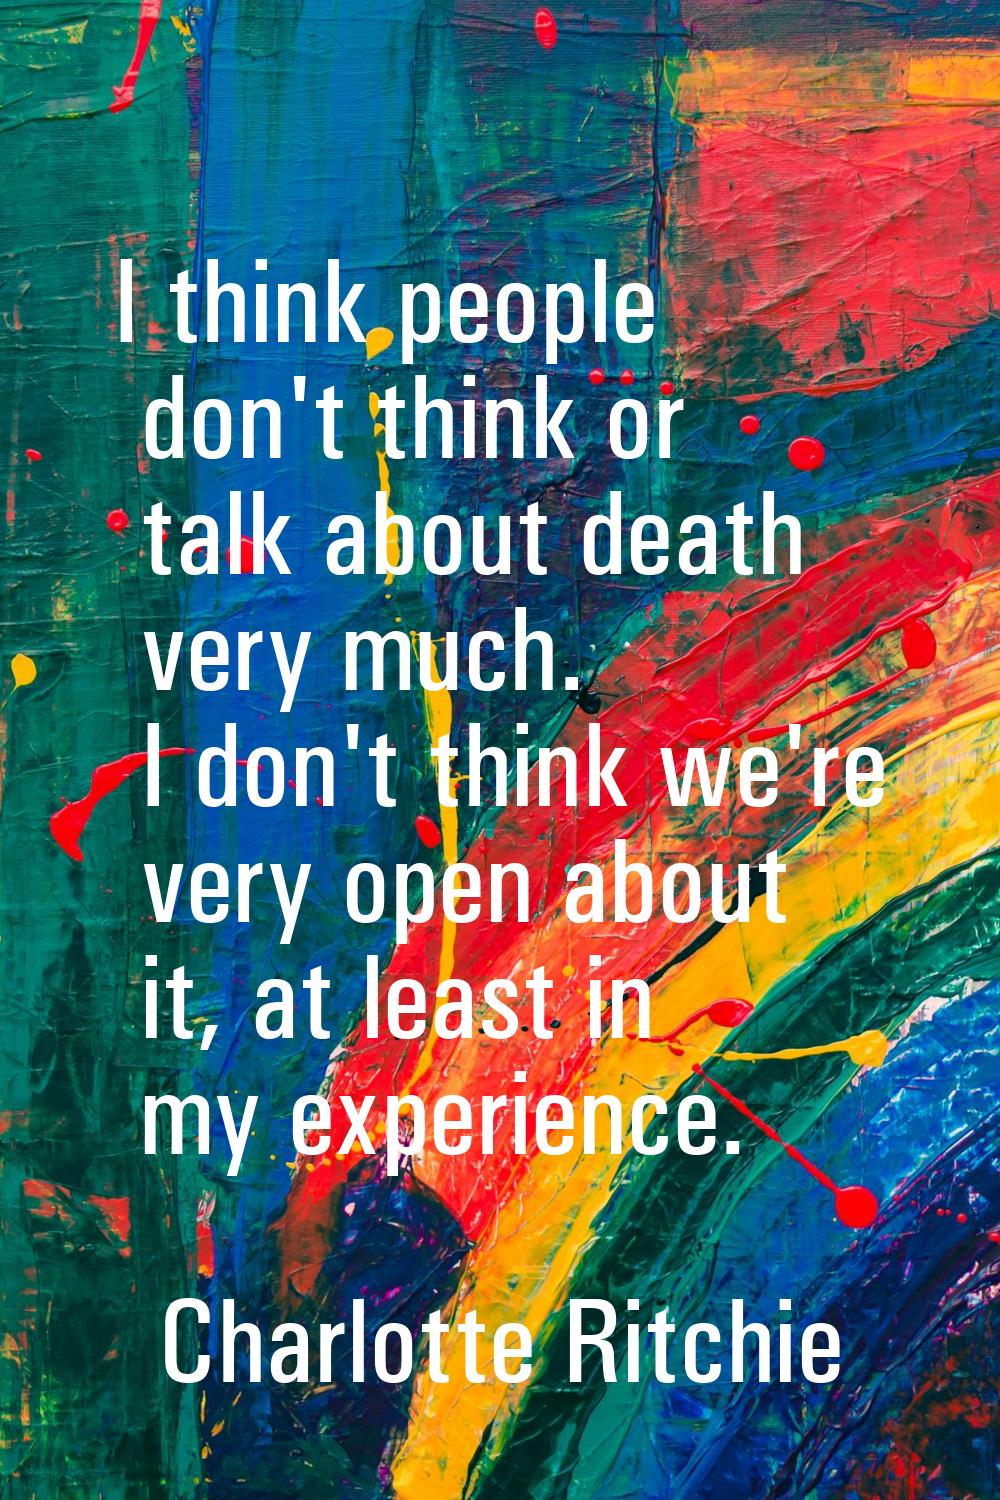 I think people don't think or talk about death very much. I don't think we're very open about it, a